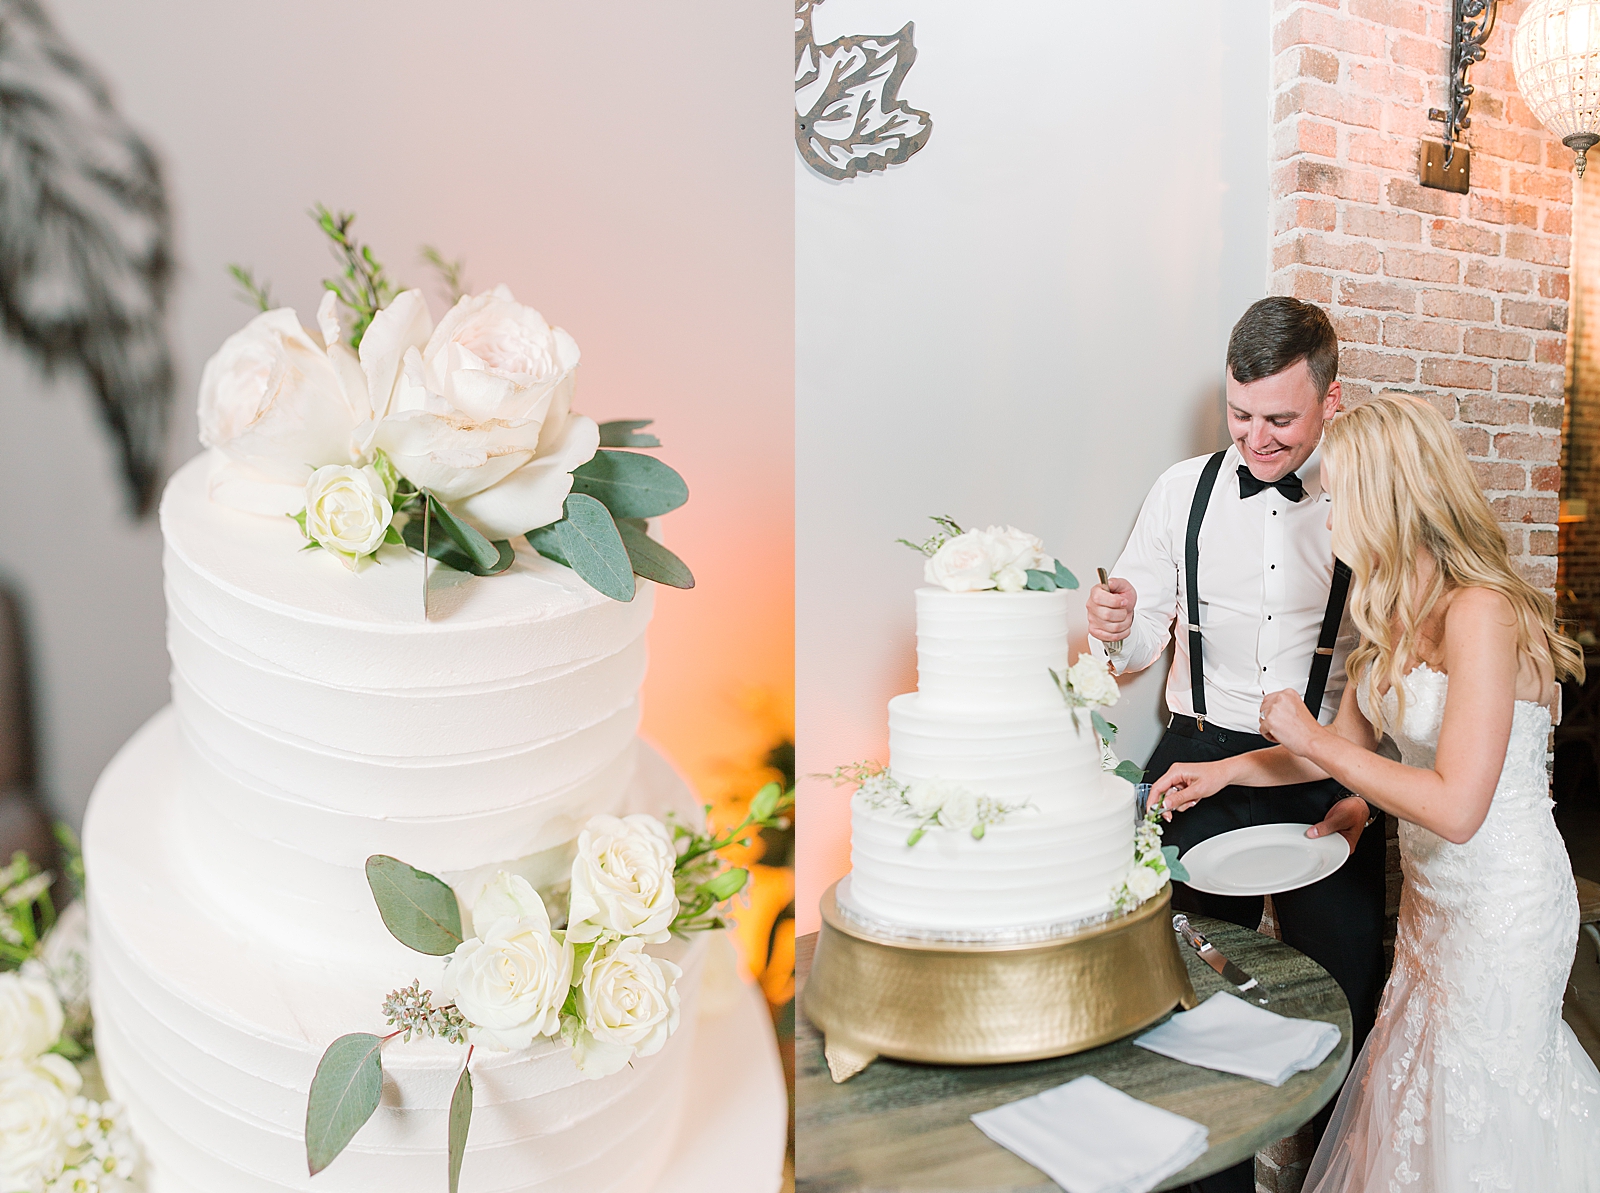 Glover Park Brewery Wedding Reception Cake Detail and Couple Cutting Cake Photos